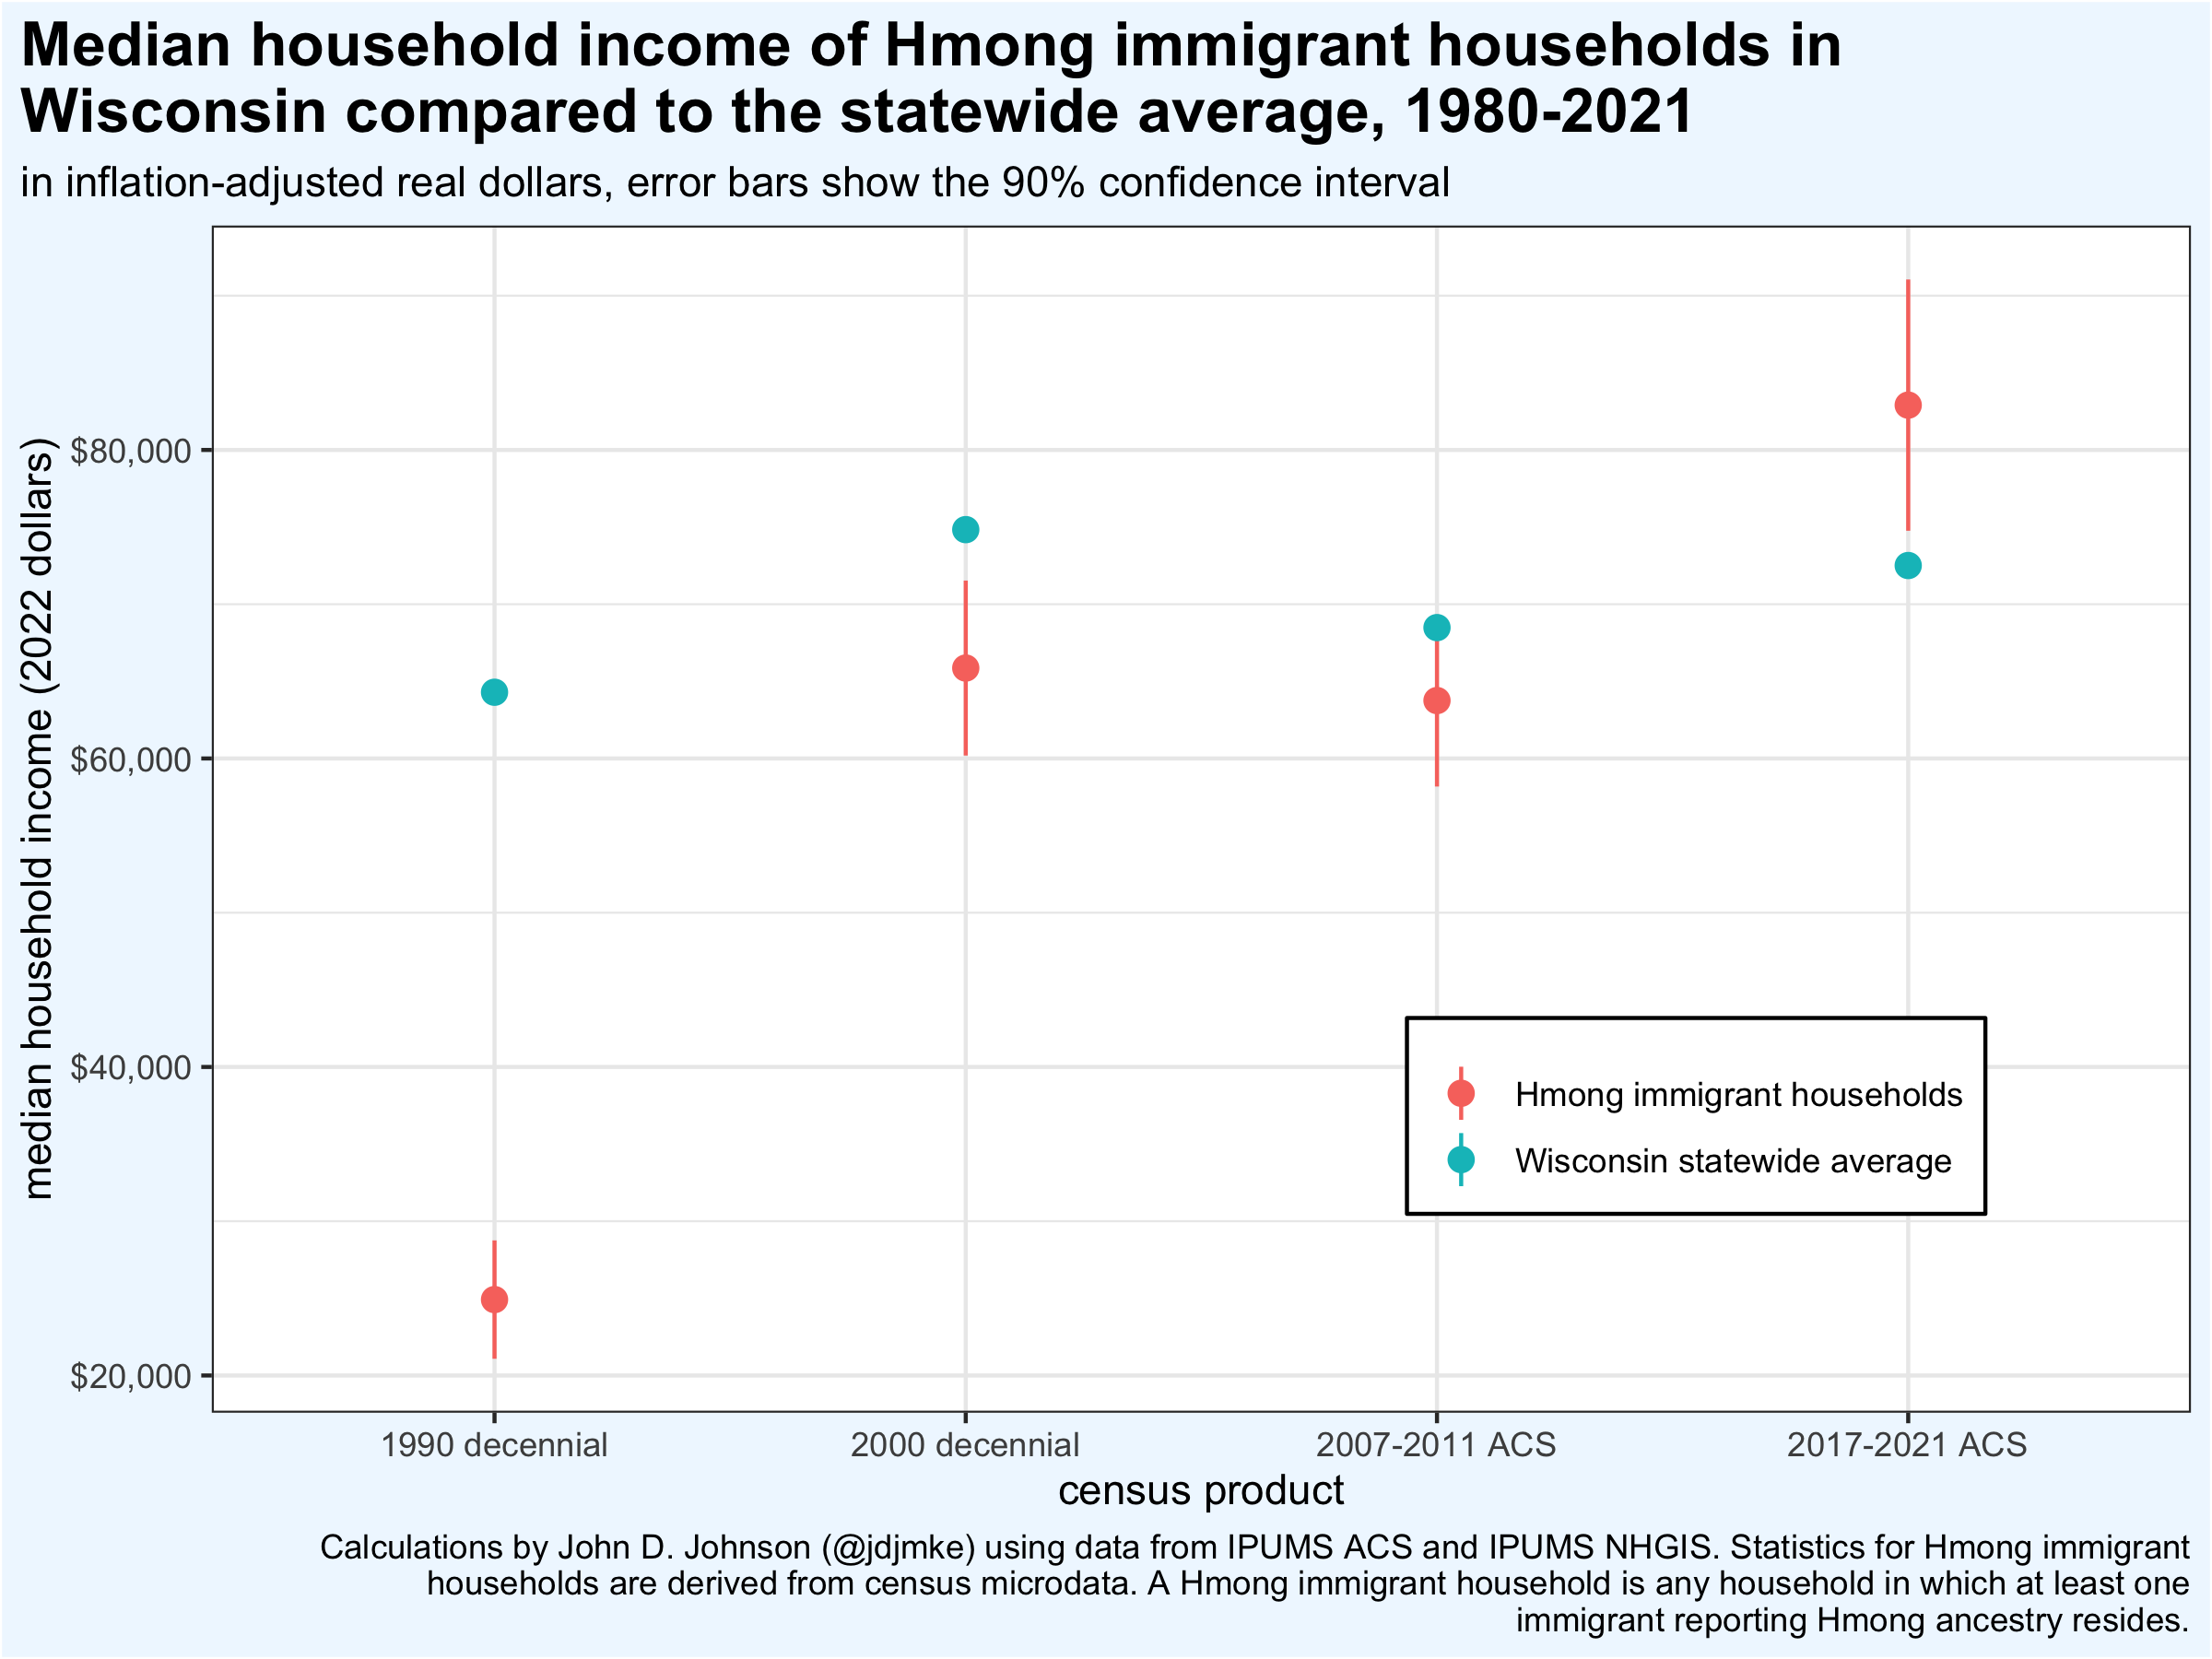 dot chart showing the median household income of Hmong immigrant households in Wisconsin compared to the statewide average, 1980-2021